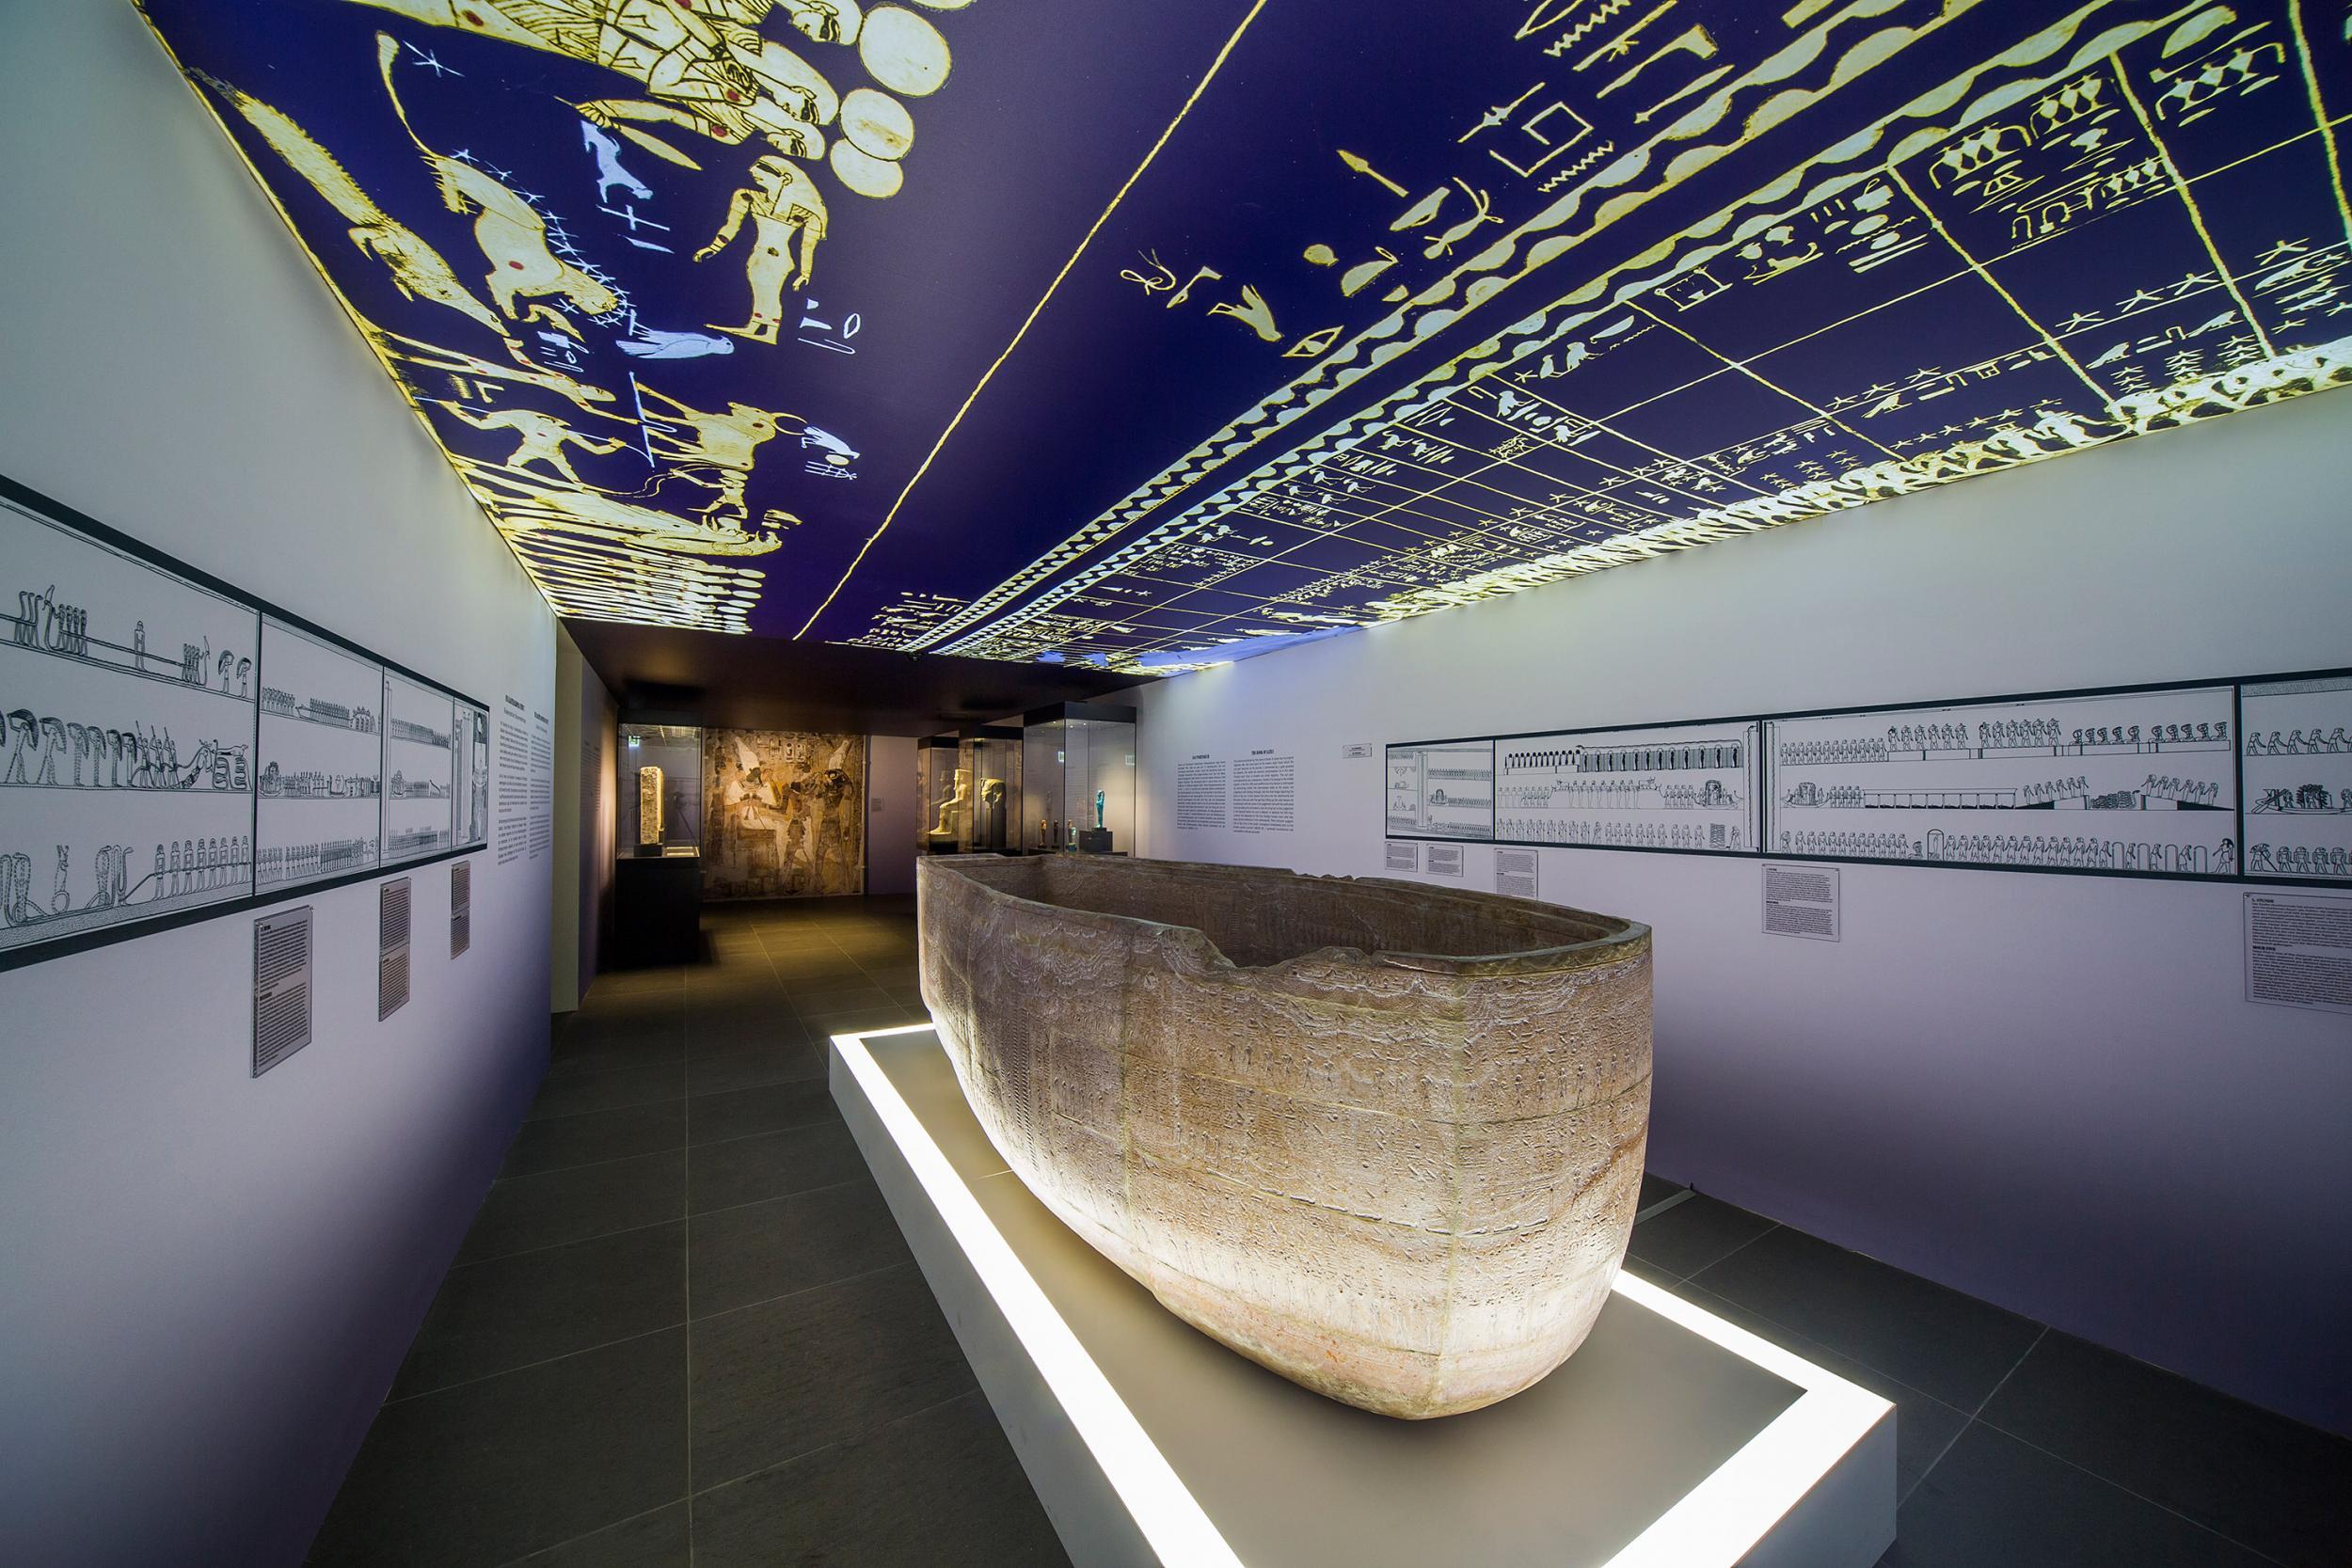 The team created a copy of Seti I's sarcophagus based on the original at Sir John Soane’s Museum, London